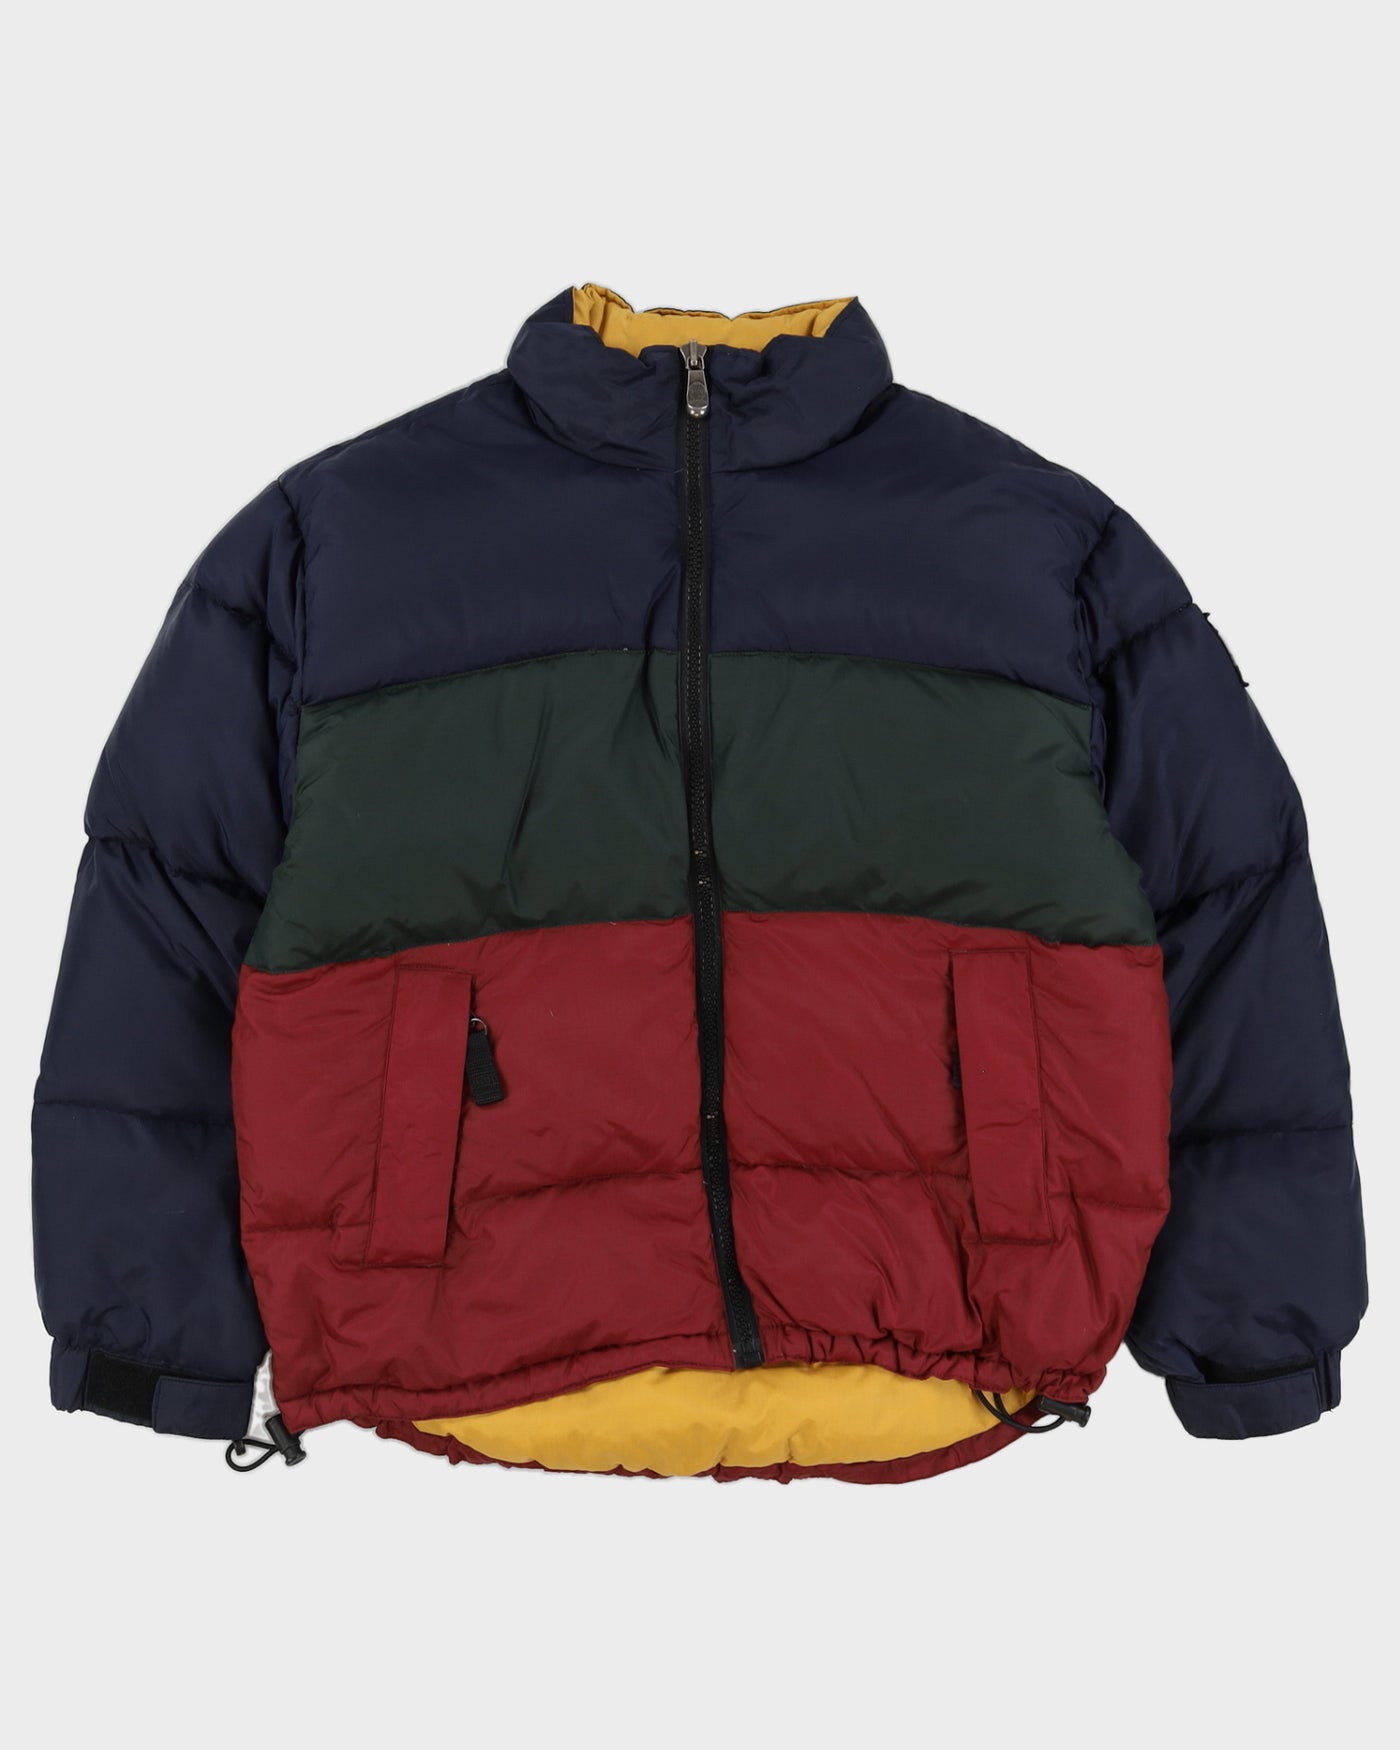 Tommy Hilfiger Multicolour Puffer Jacket - M